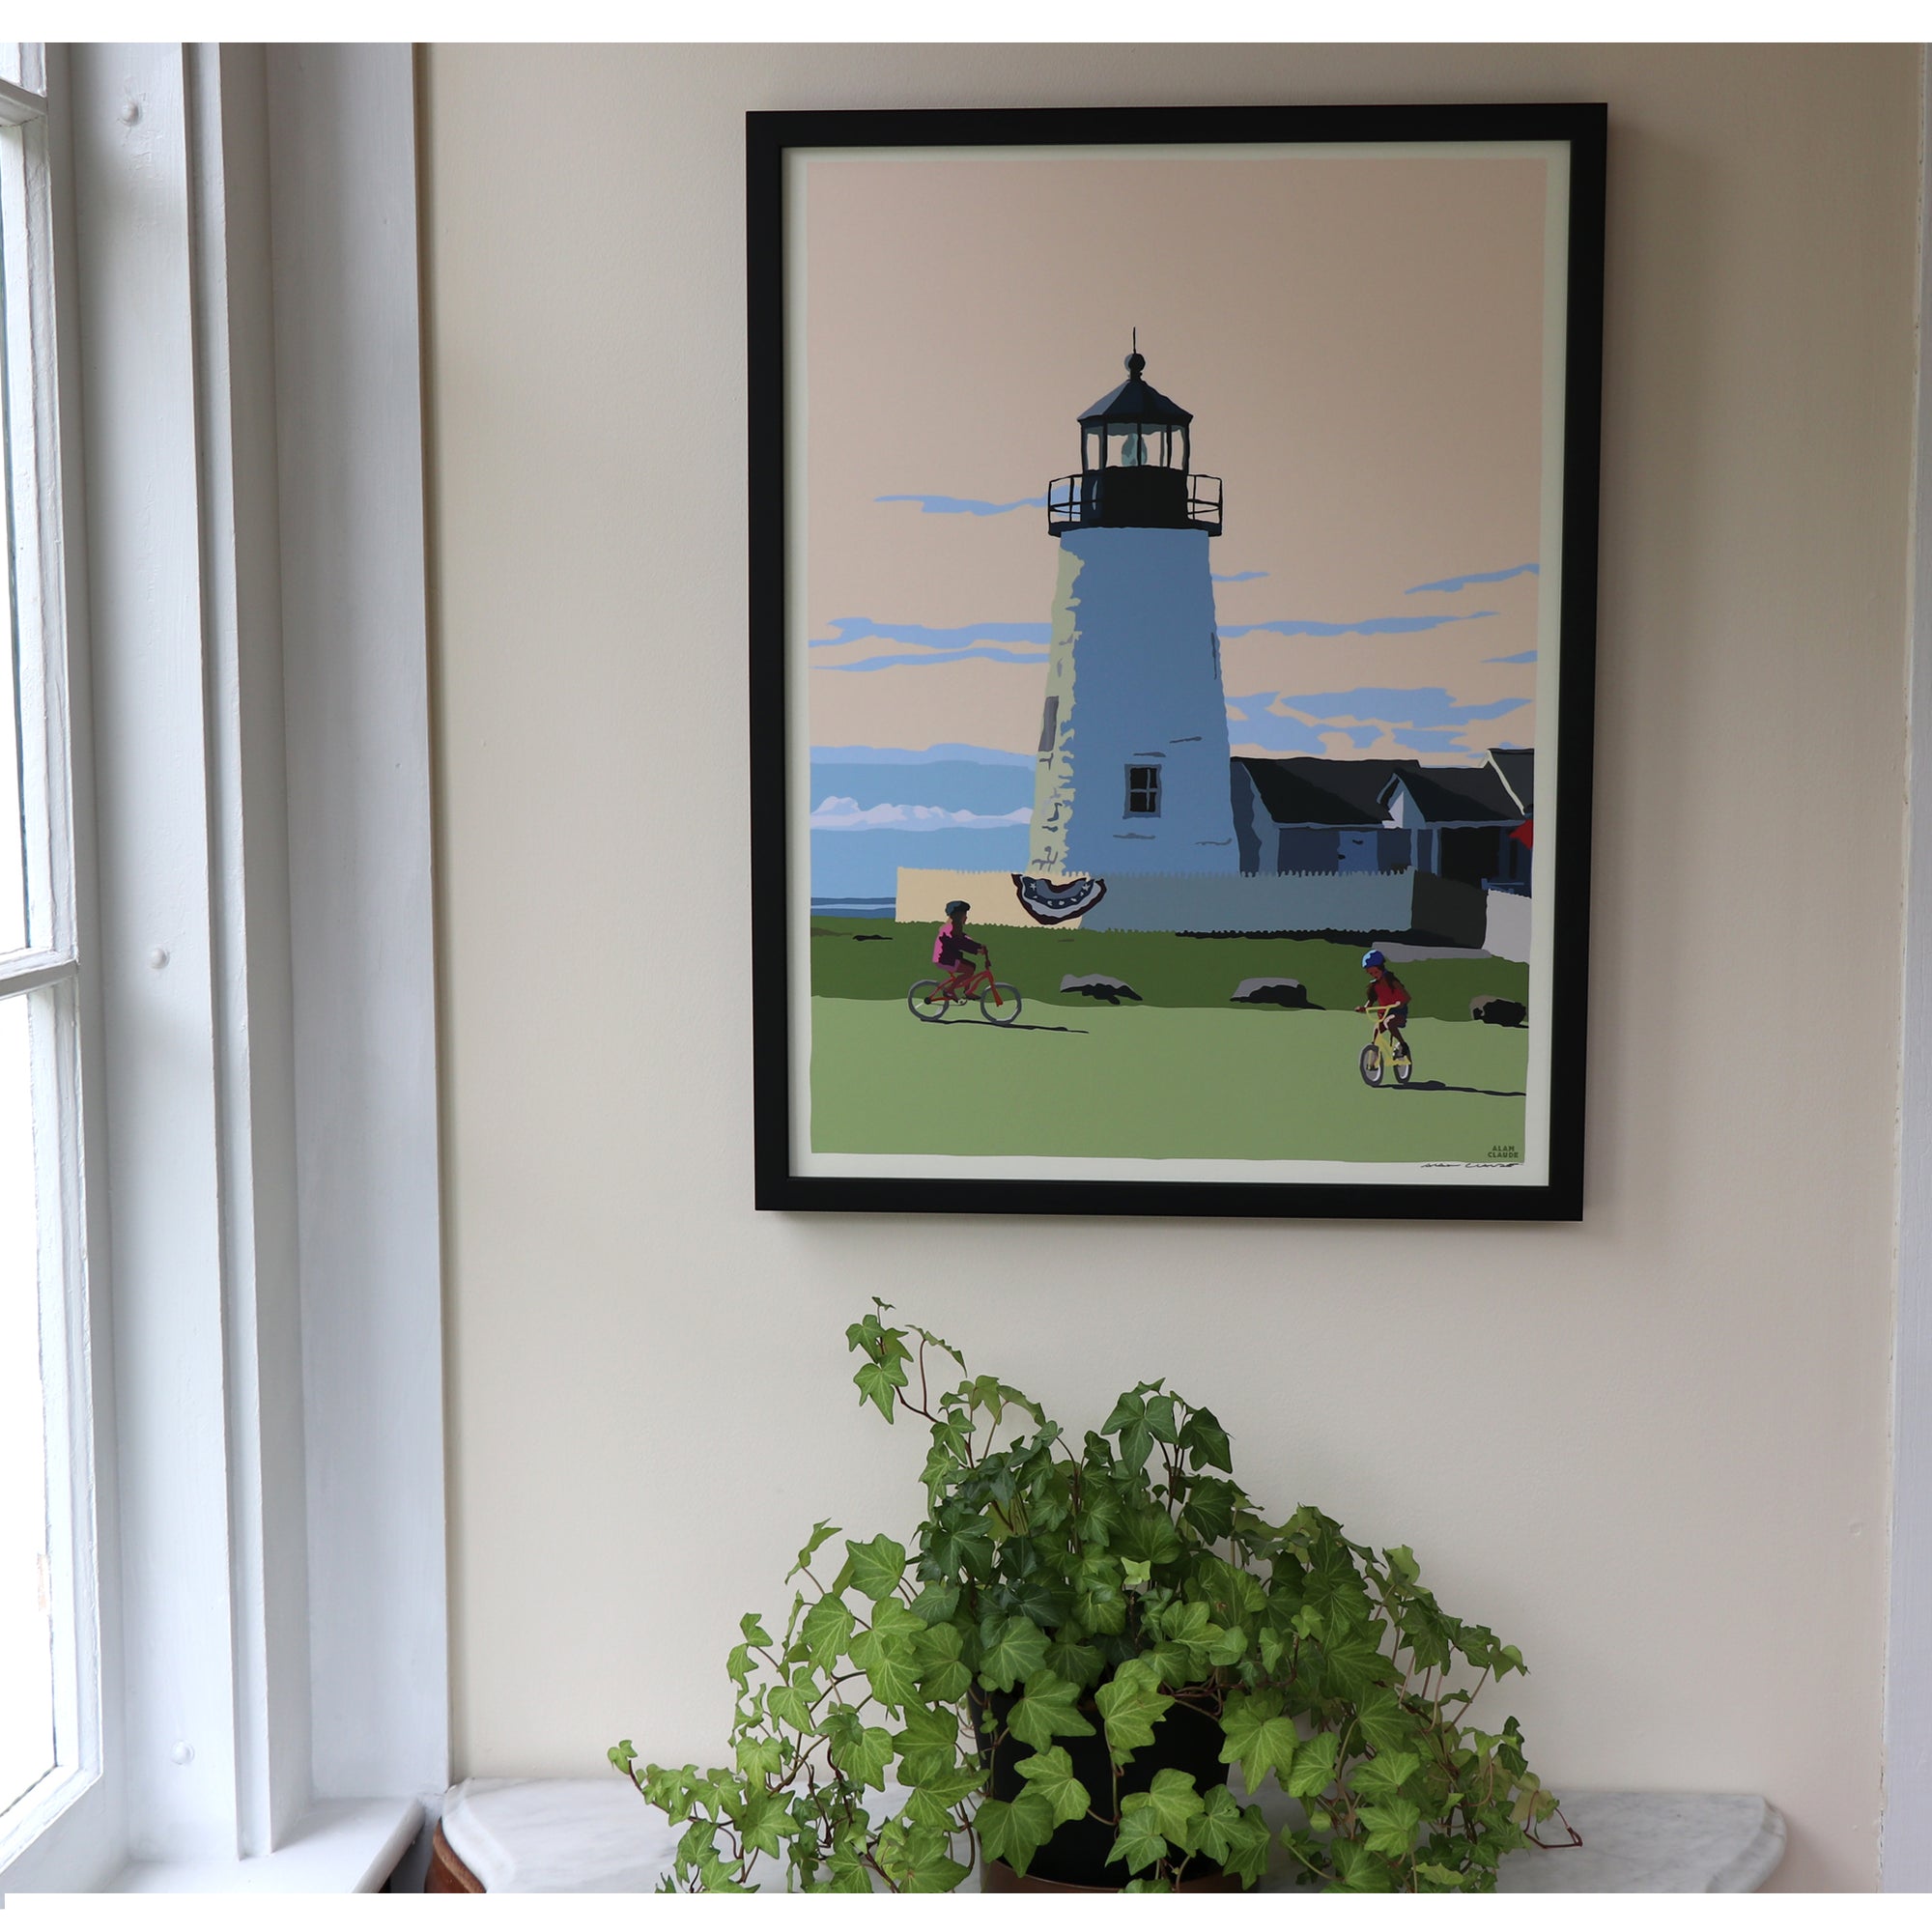 Pemaquid Bicycle Girls Art Print 18" x 24" Framed Wall Poster By Alan Claude - Maine